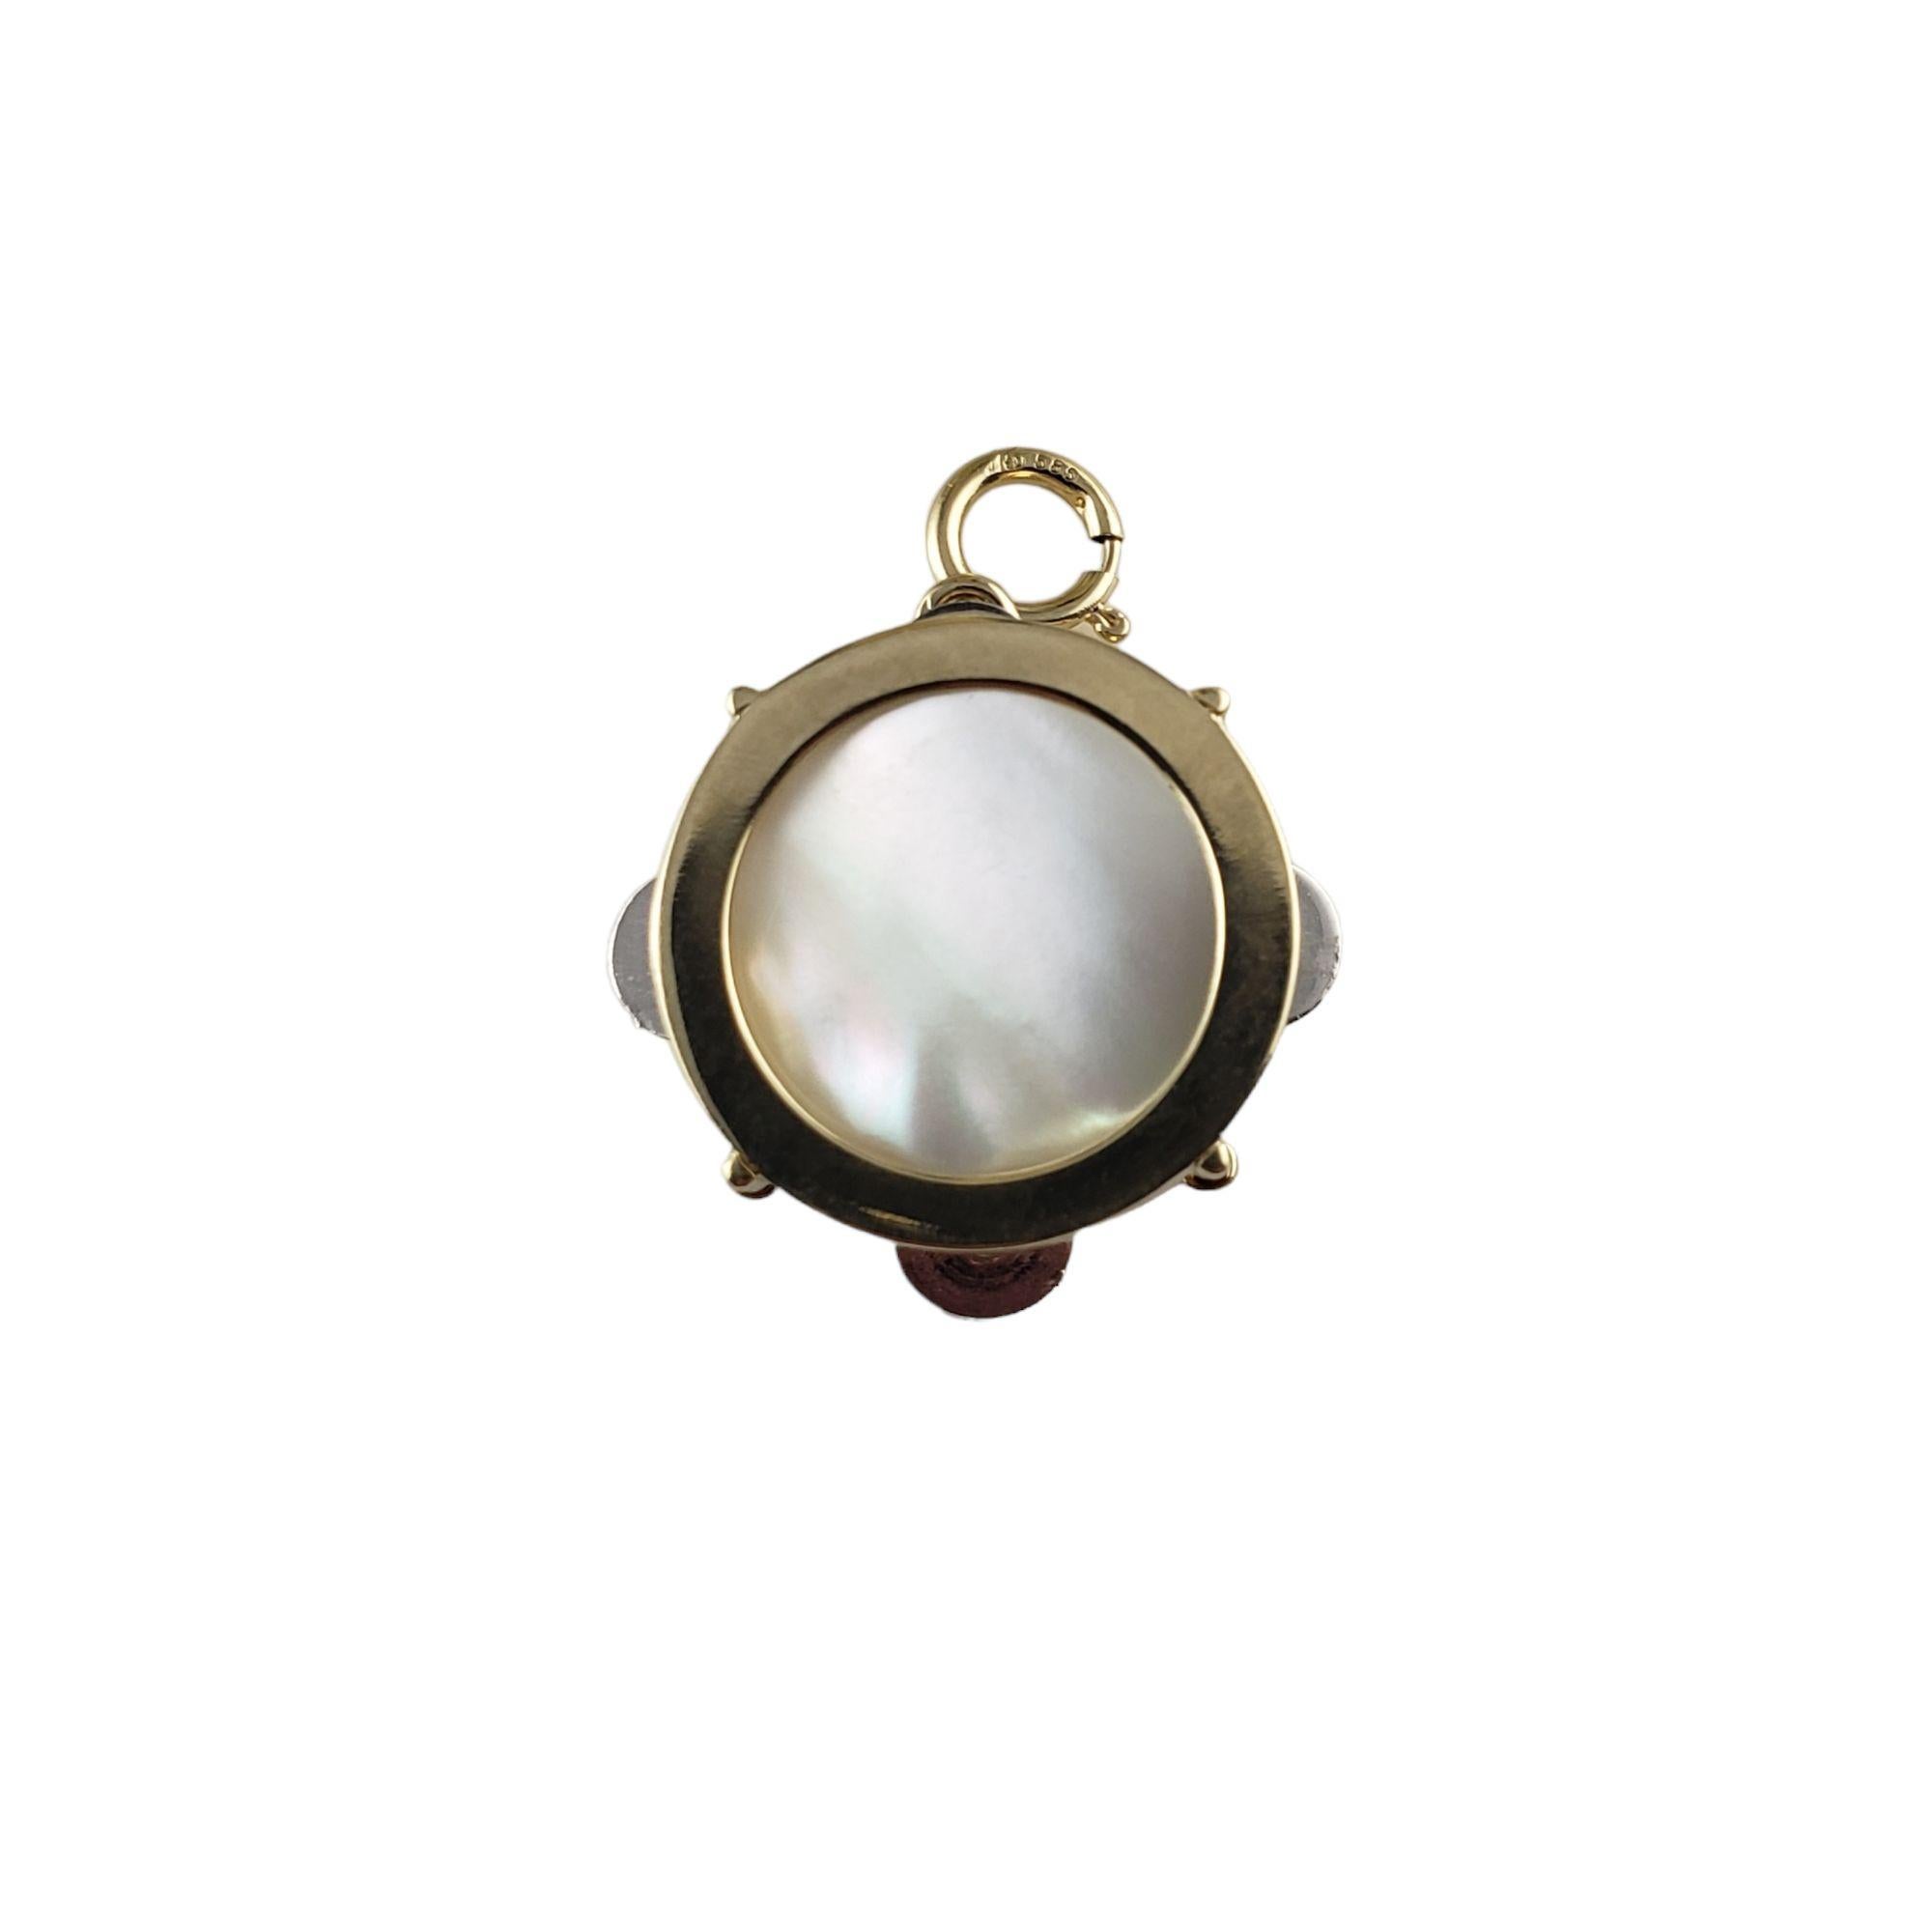 Vintage 14 Karat Yellow Gold Tambourine Charm-

This lovely 3D charm features a miniature tambourine crafted in beautifully detailed 14K yellow gold and mother of pearl.

Size: 19 mm

Weight: 3.2 gr./ 5.0 dwt.

Stamped: 14K

Very good condition,